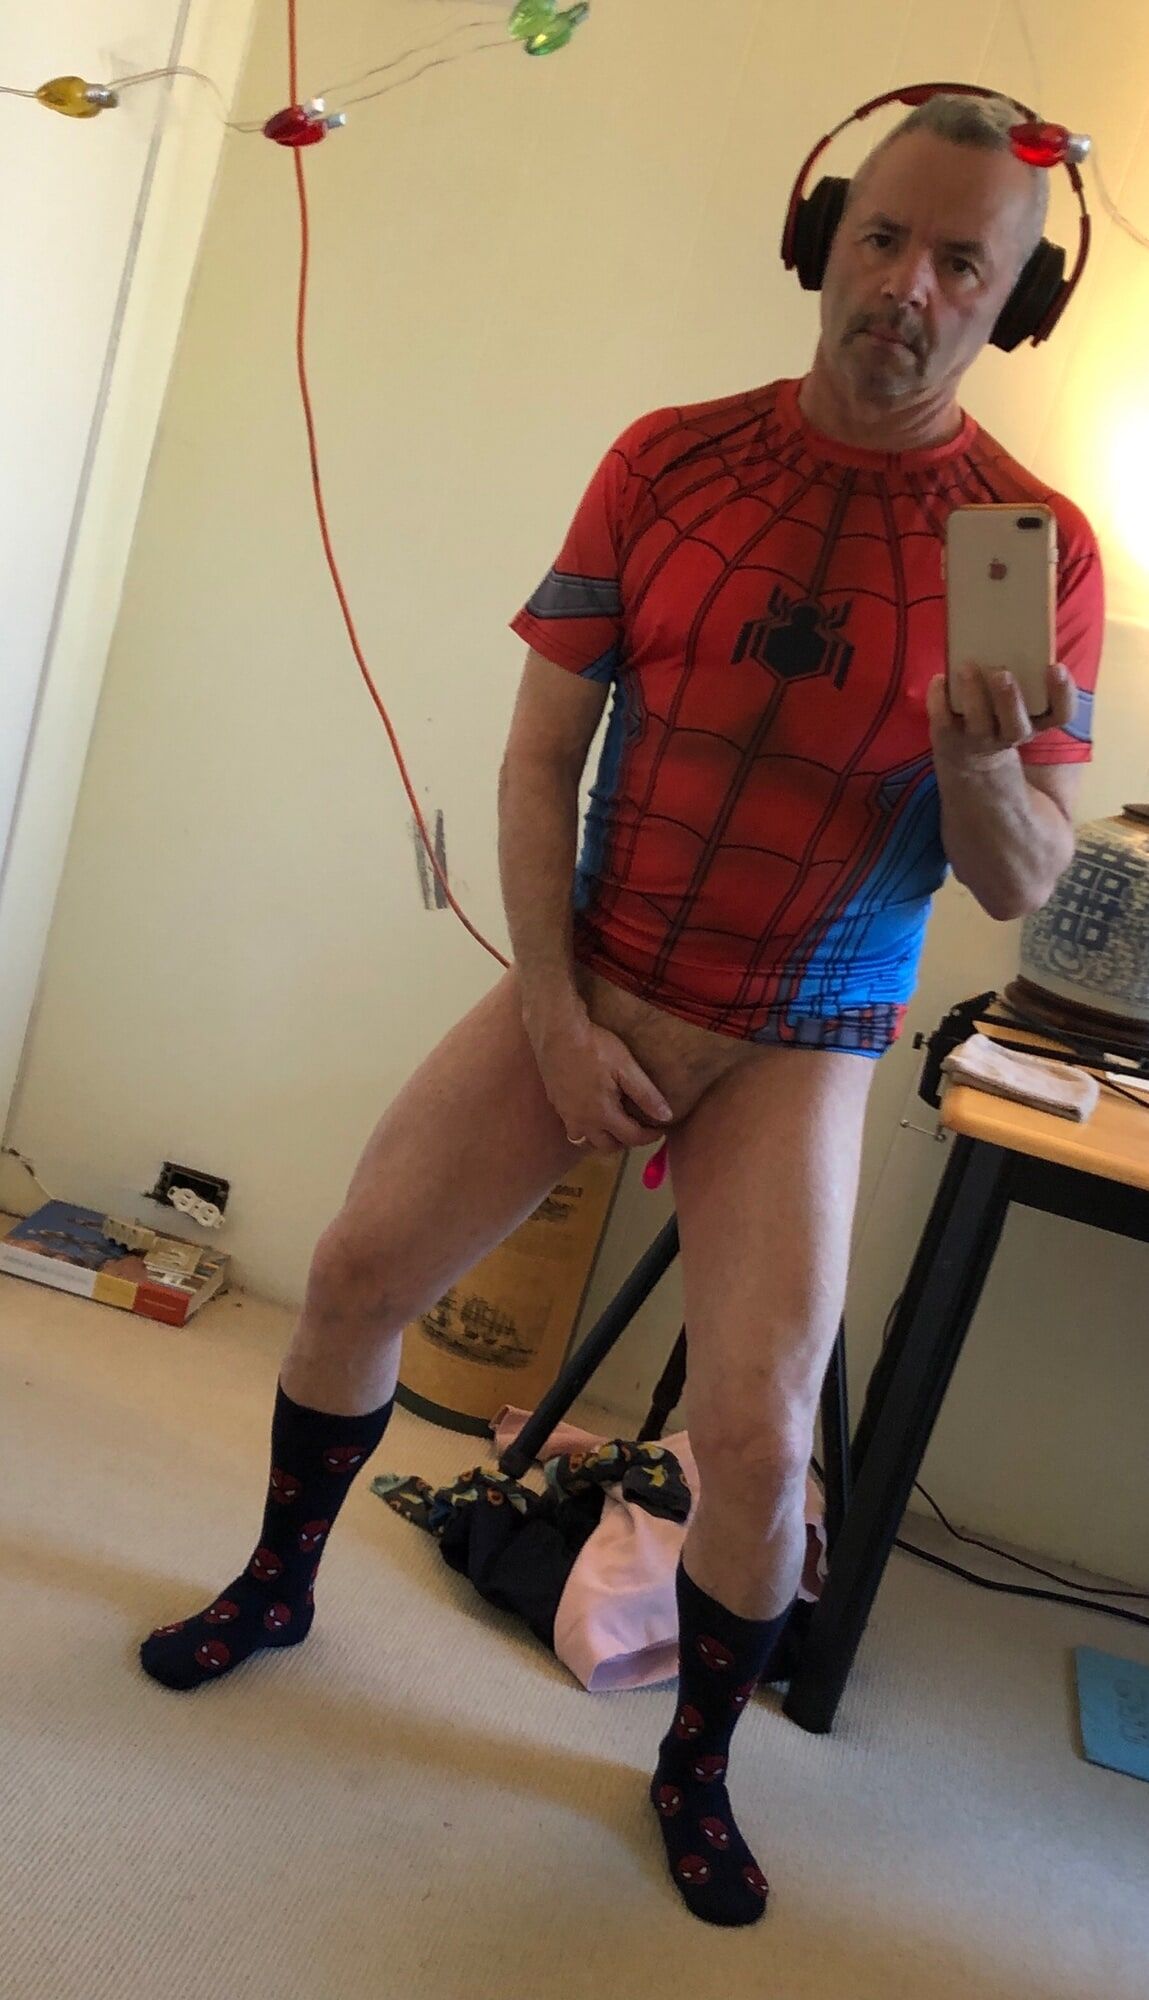 Costume-Halloween Is Coming! No Costume For My Dick! LOL #3